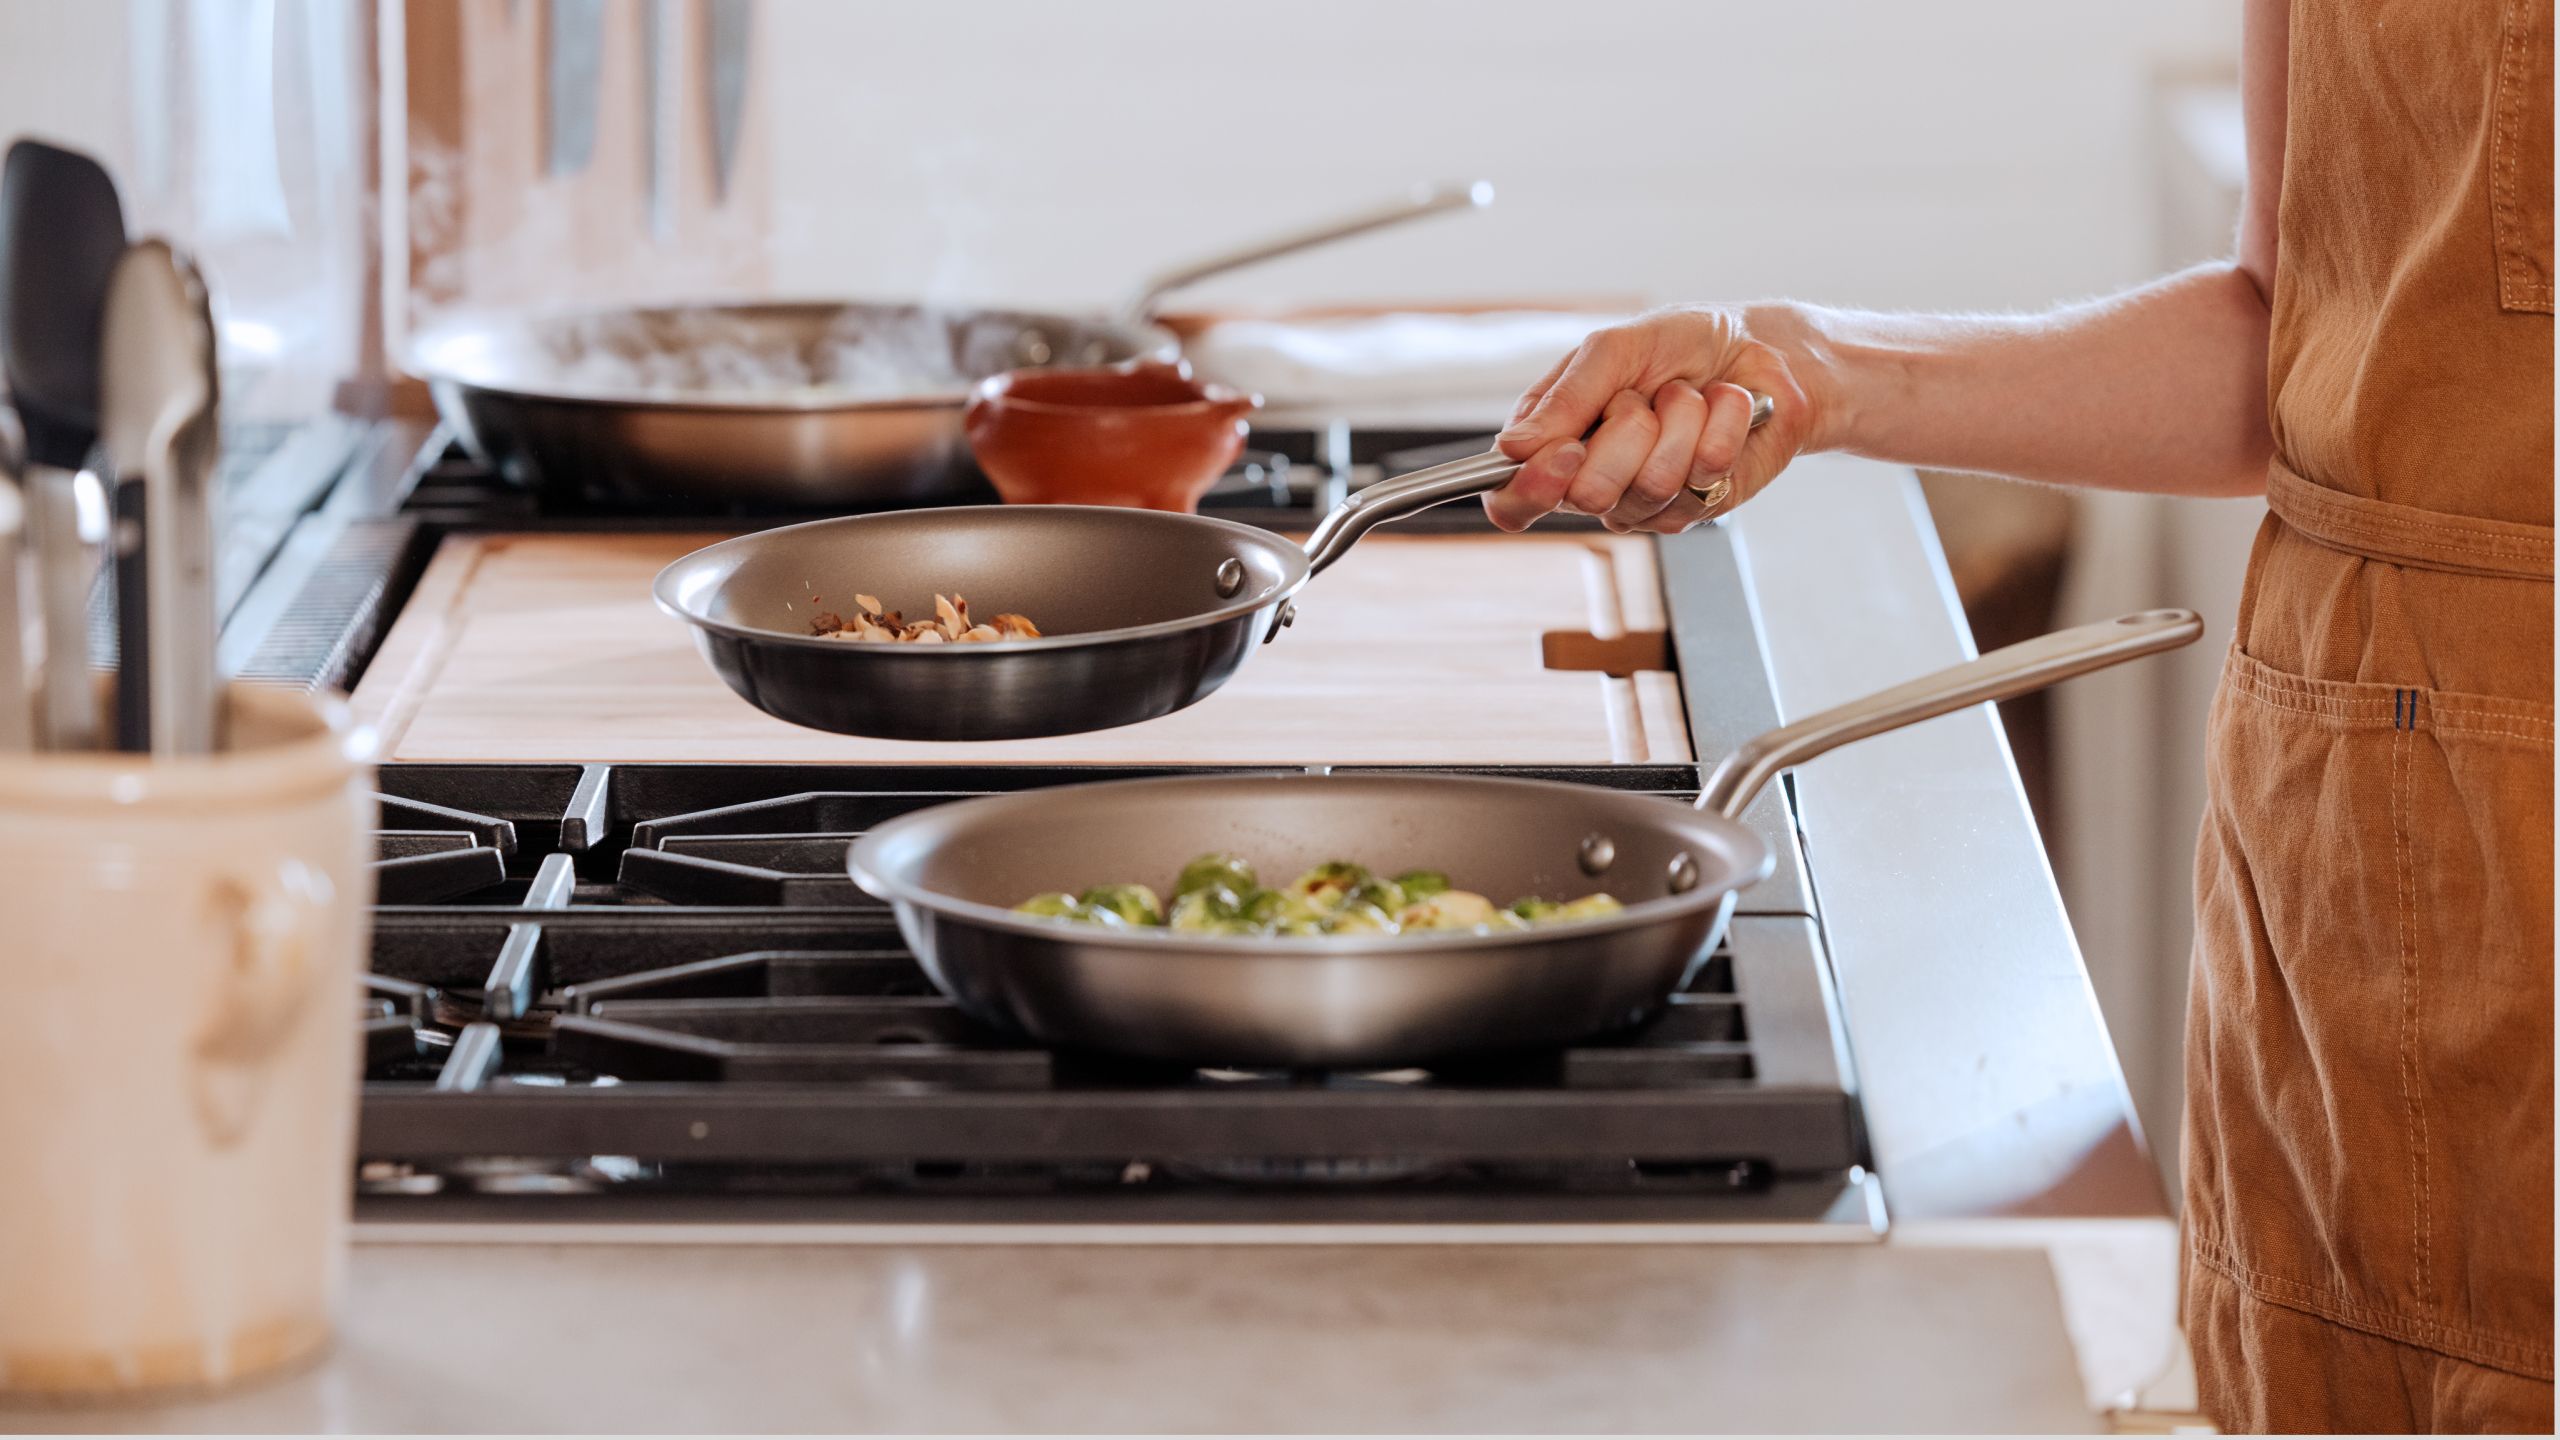 What Are The Pros And Cons Of Using Ceramic Cookware?